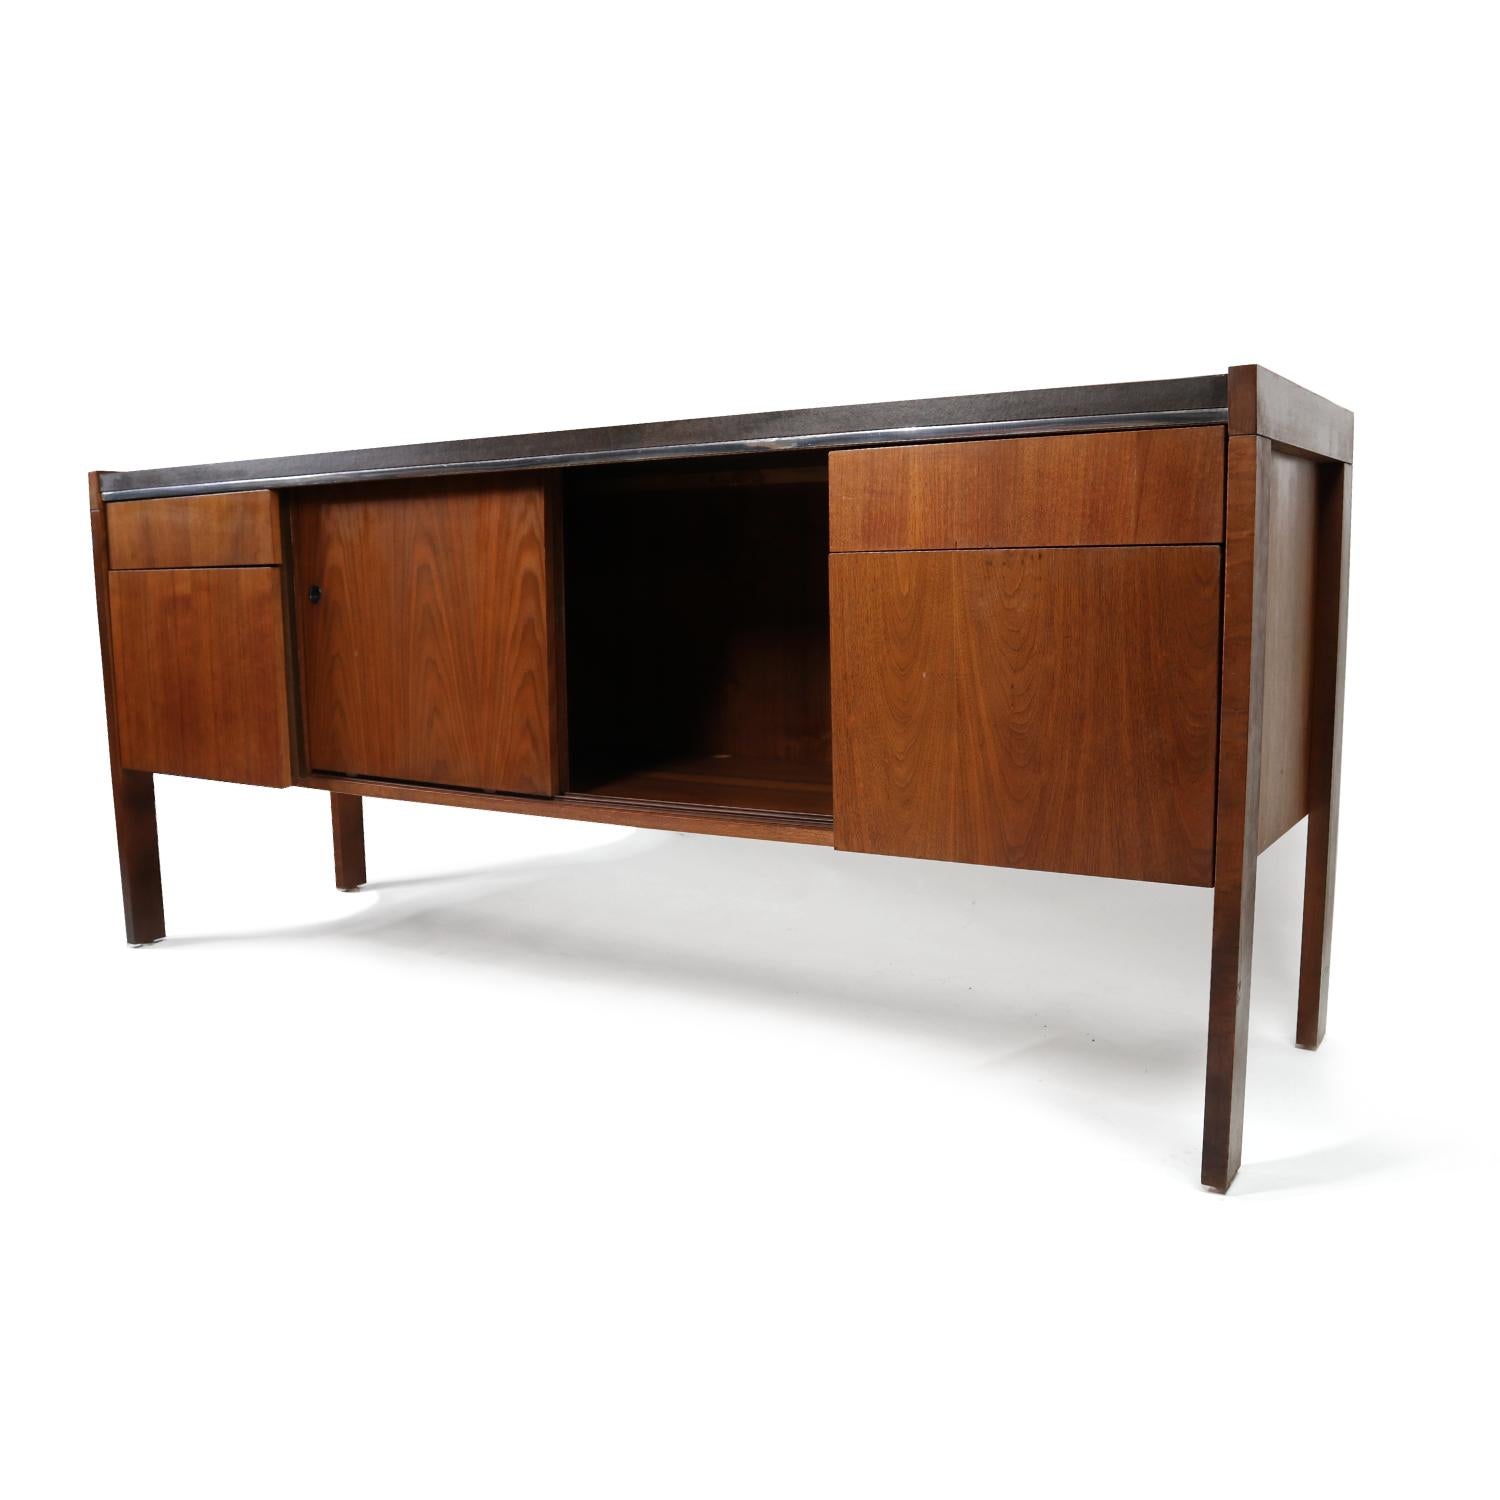 Walnut office credenza by Biltrite of Canada. Fully finished backside is ideal so you don’t have to place it against a wall. The unit has two small drawers and two larger, filing drawers. Two sliding doors open to reveal an open storage area perfect